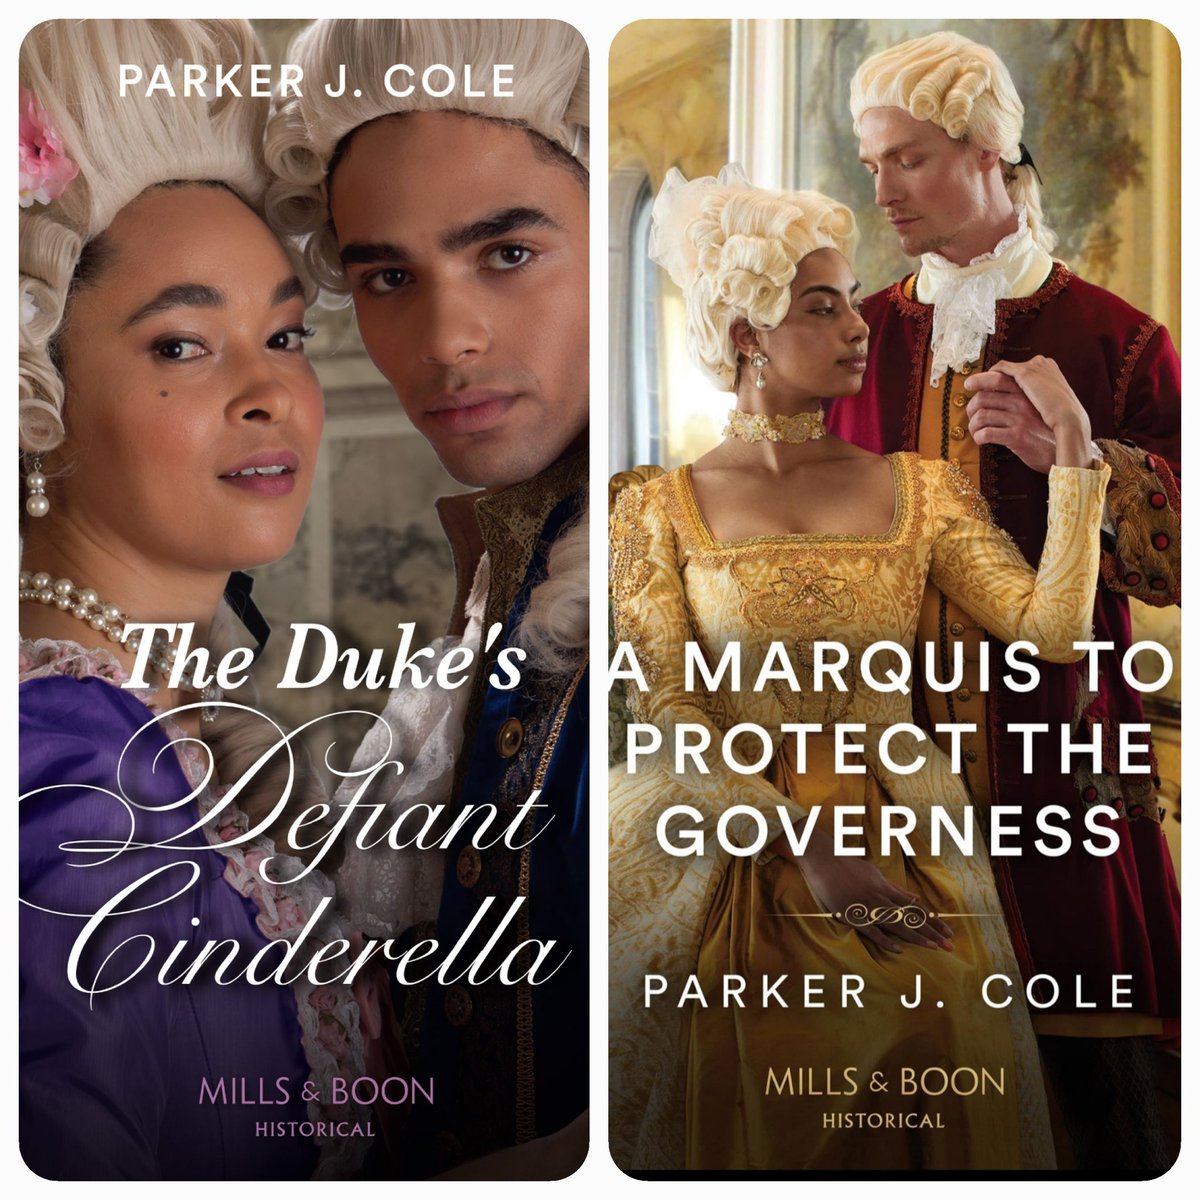 I am looking forward to USA Today Bestselling author @ParkerJCole next Mills and Boon Historical. In the meantime, you can purchase your copy of The Duke’s Defiant Cinderella and A Marquis to Protect The Governess. ✨️ #historicalfiction #HistoricalRomance #mustreadbooks